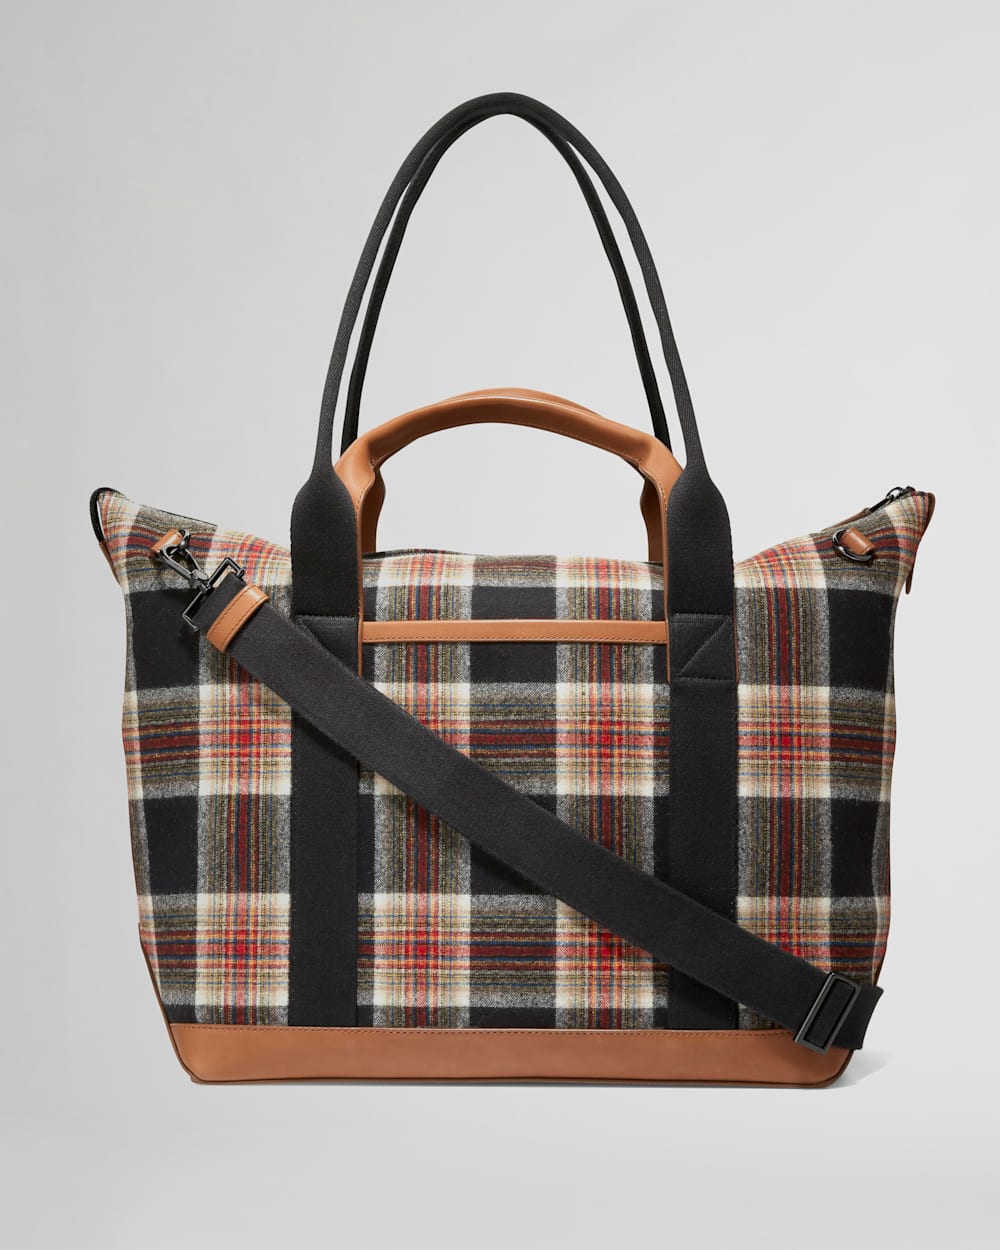 ALTERNATE VIEW OF COLE HAAN X PENDLETON LUX TOTE IN ACADIA PLAID image number 4